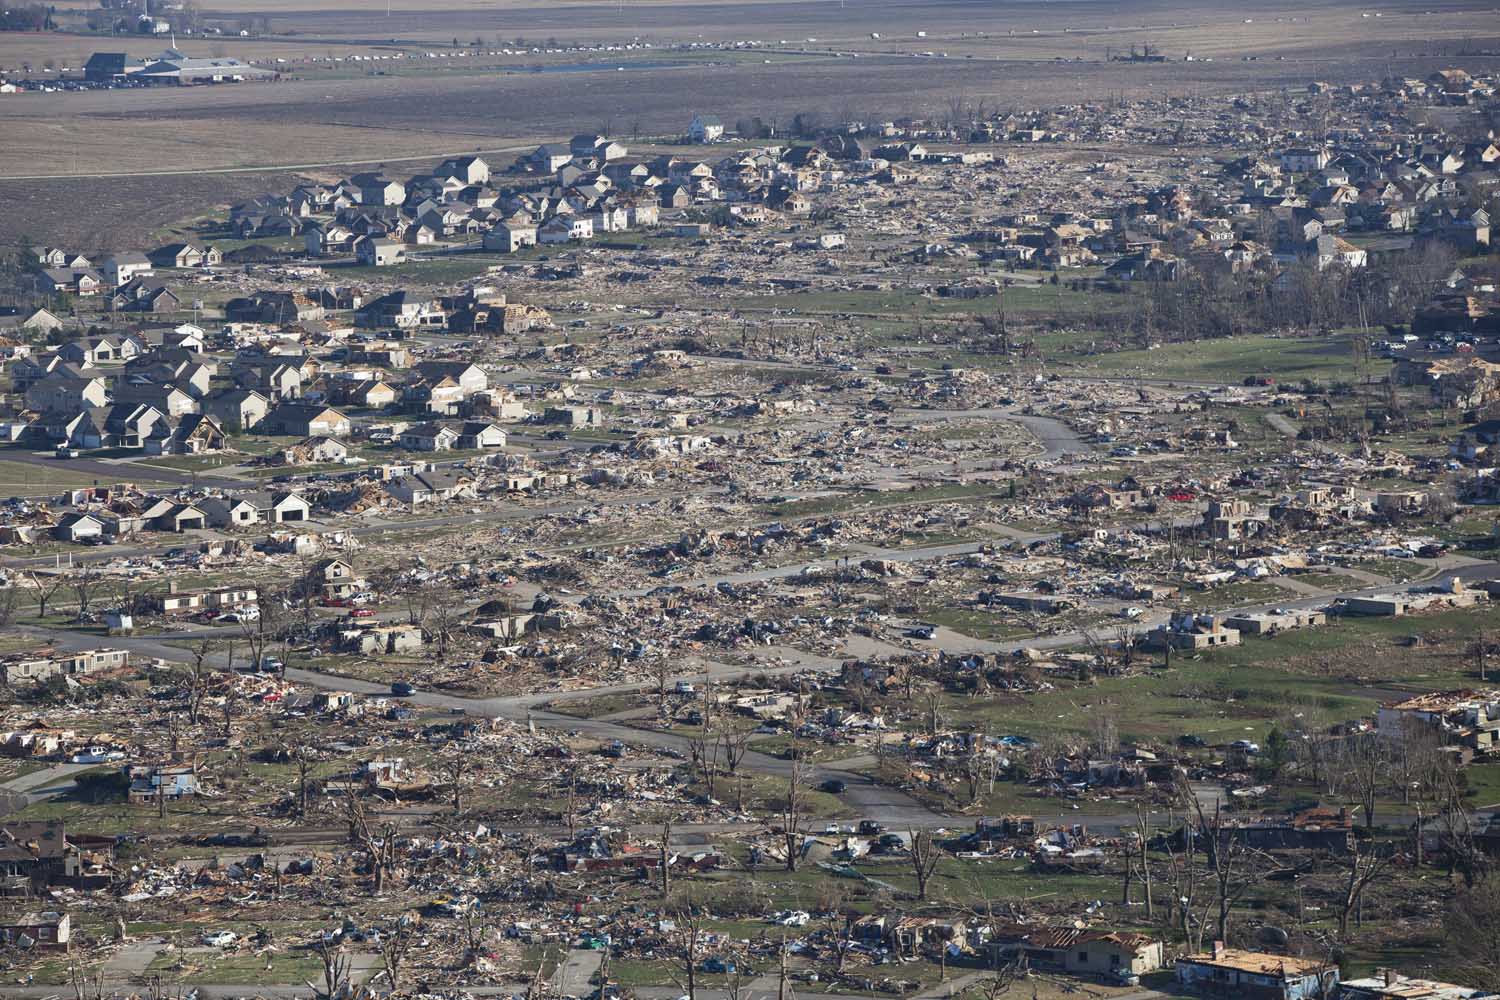 Nov. 18, 2013. An aerial image shows the devastation caused by a tornado which struck the town of Washington, Ill., over the weekend.